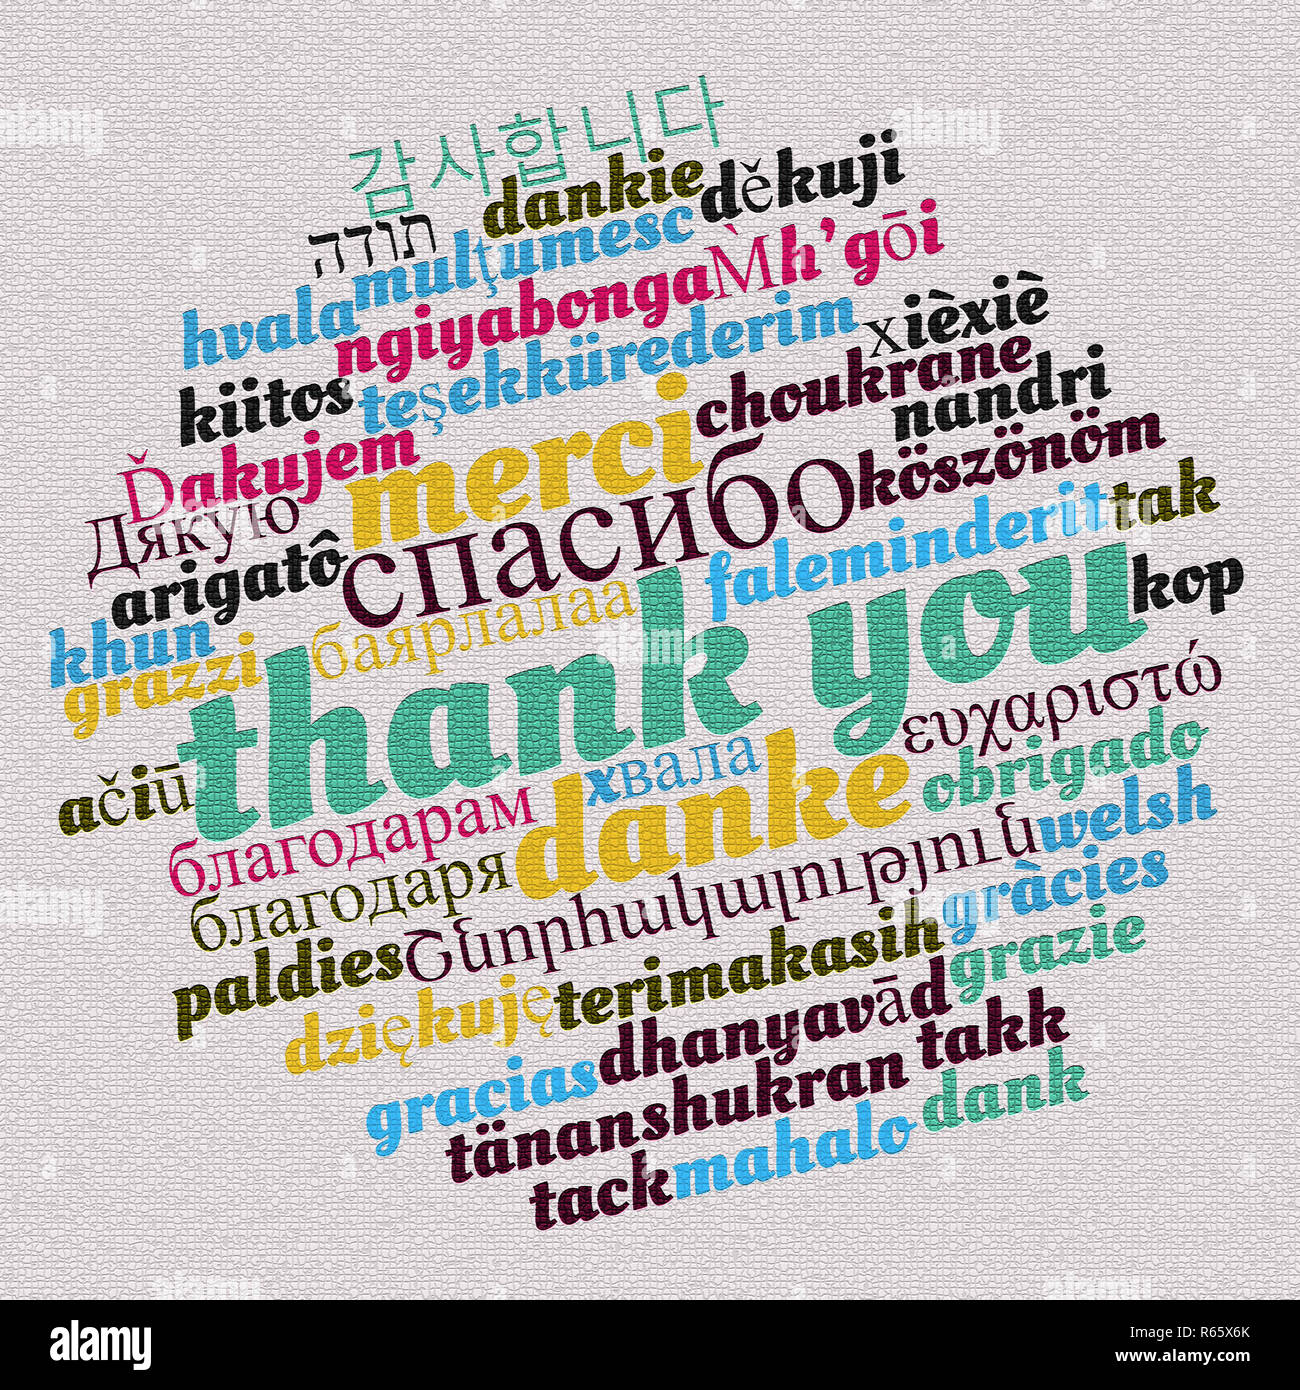 Thank you word cloud concept Stock Photo